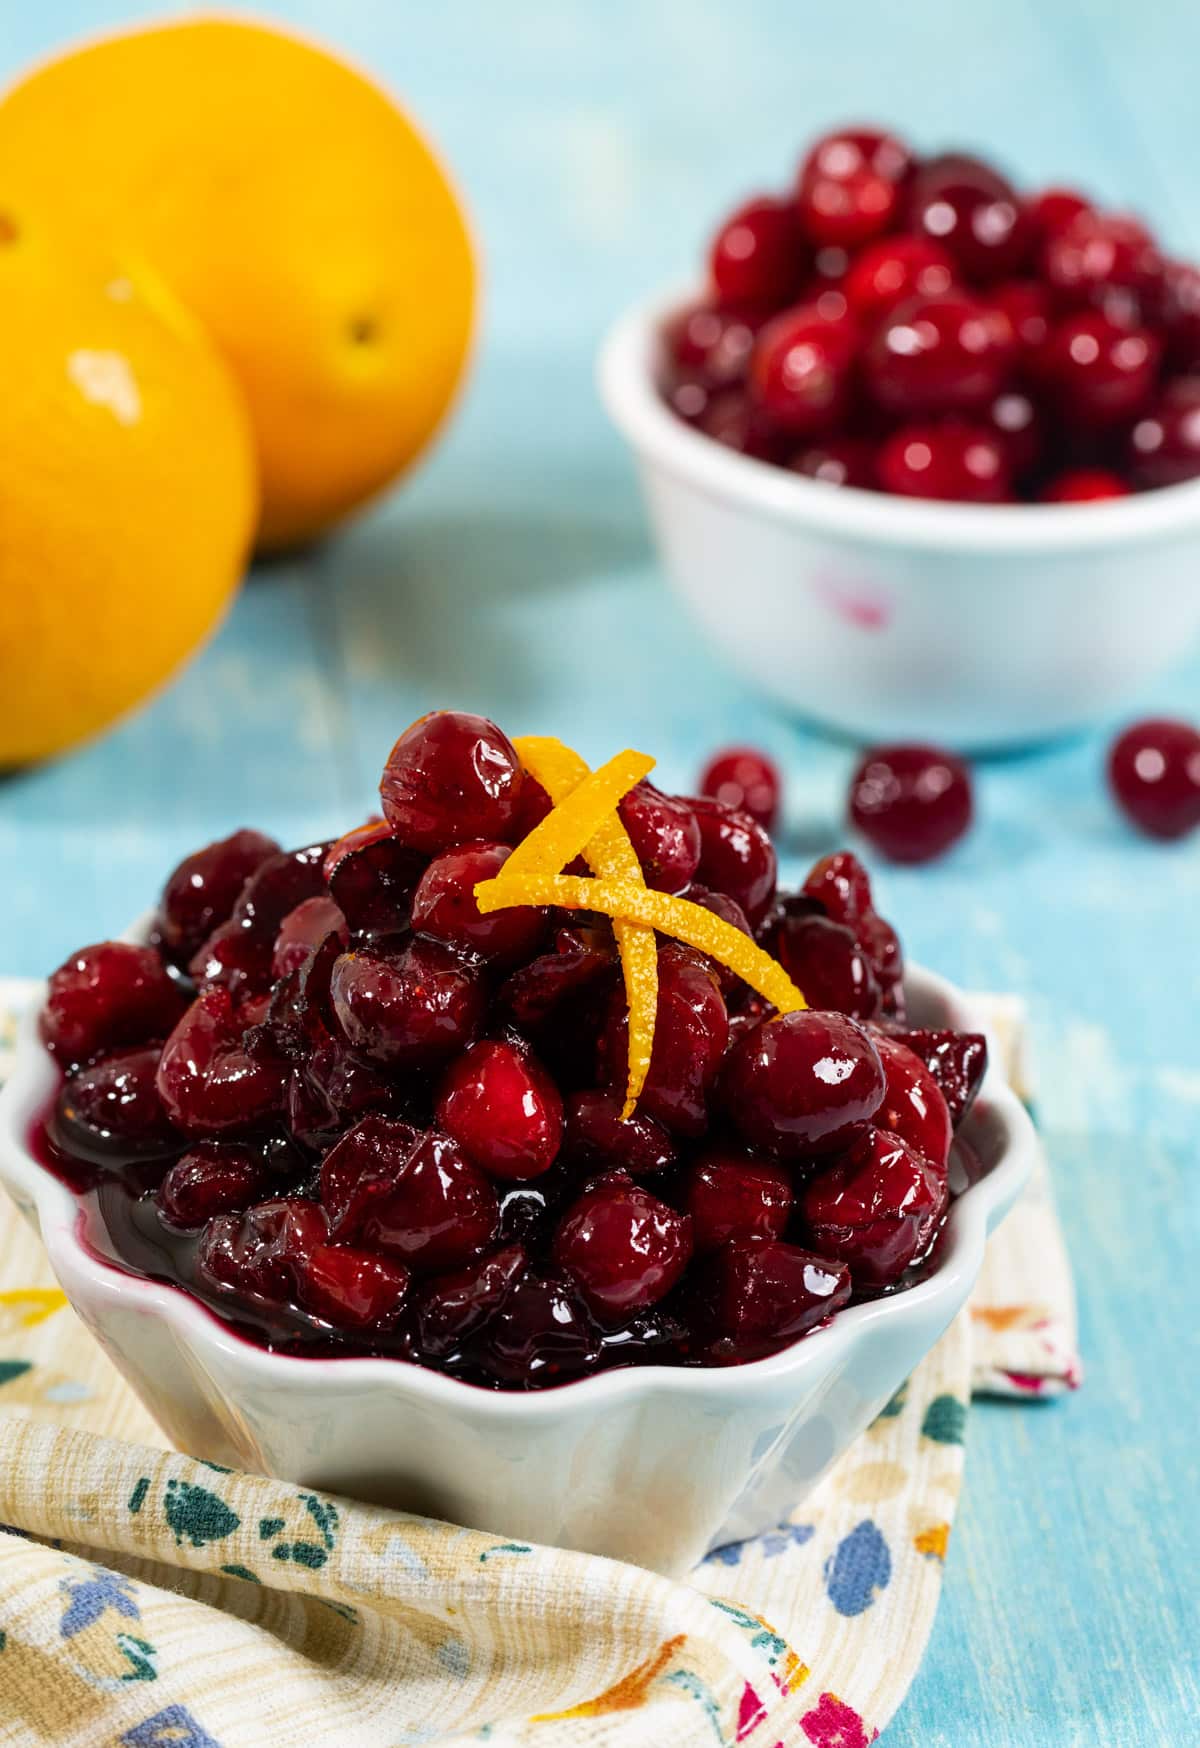 Cranberry Sauce topped with orange rind.